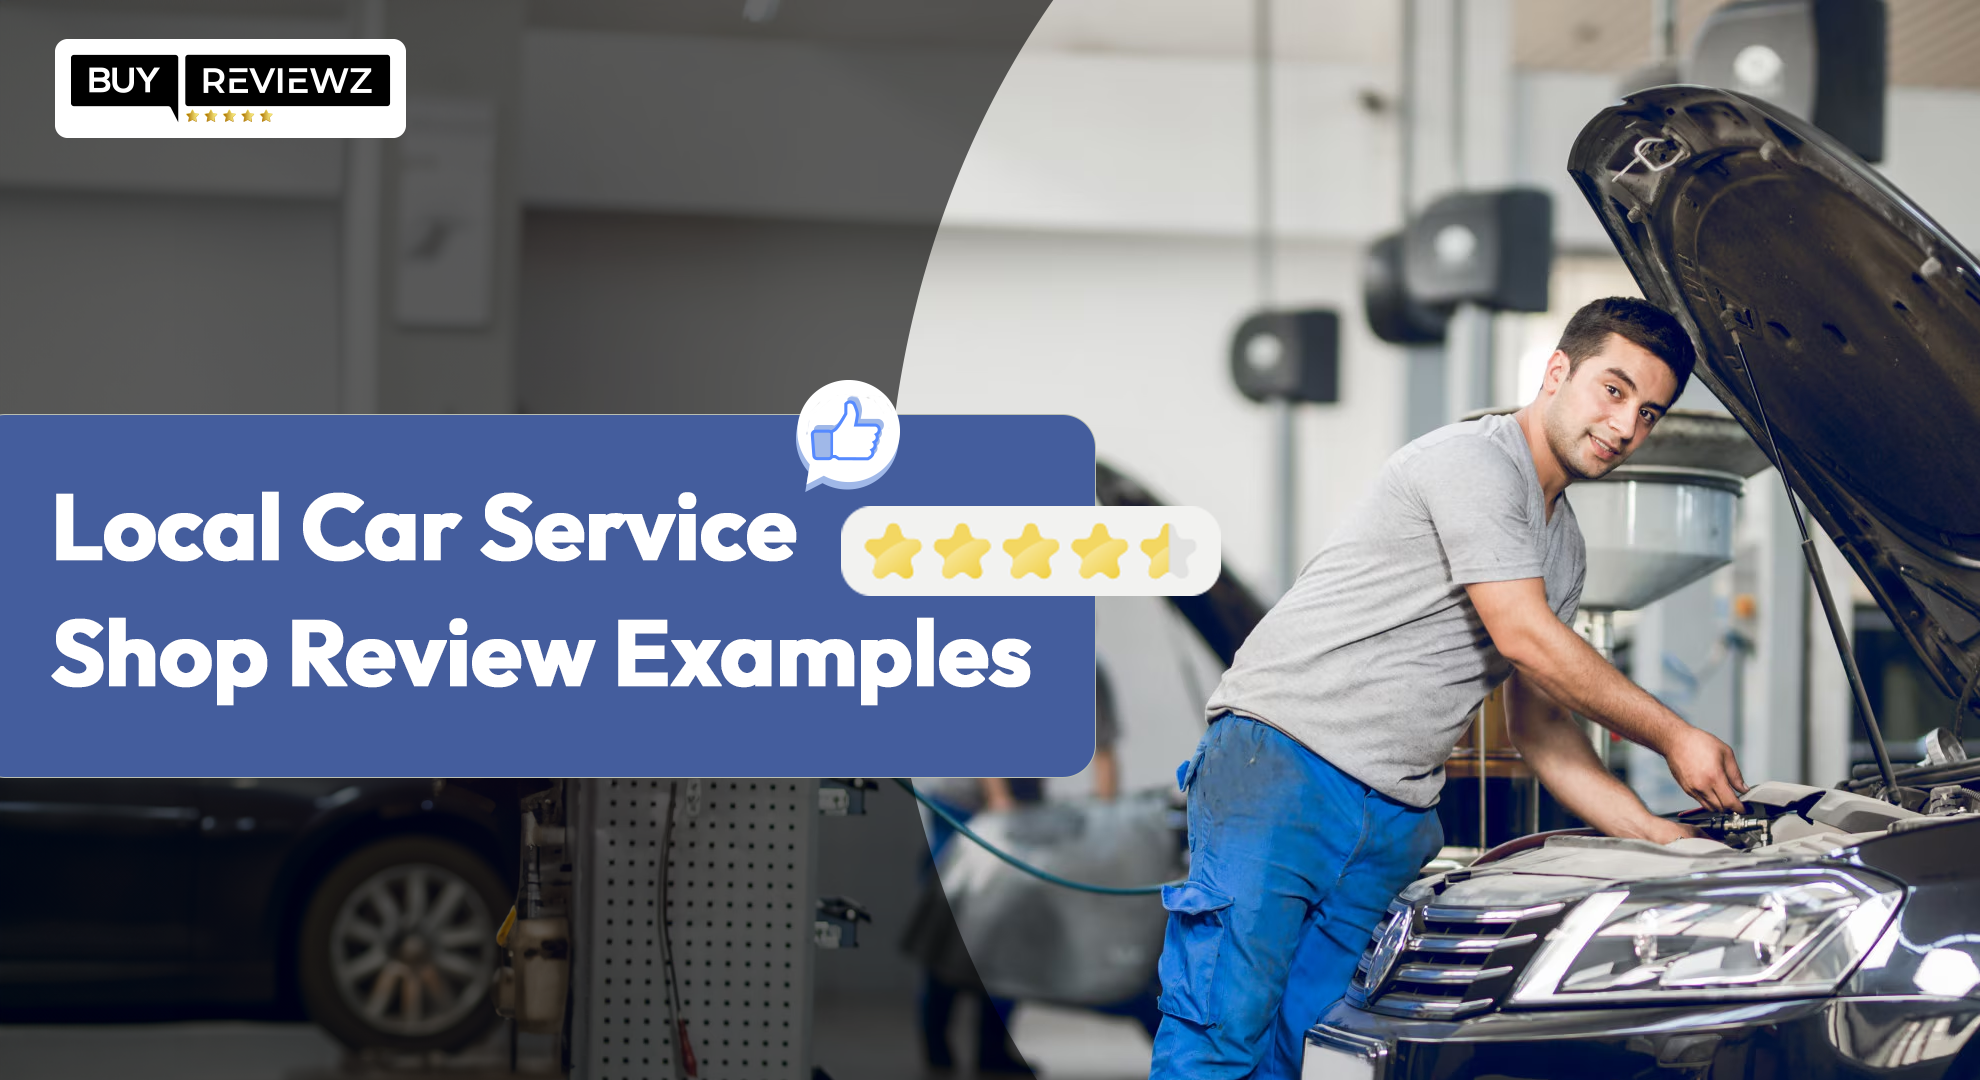 Local Car Service Shop Review Examples